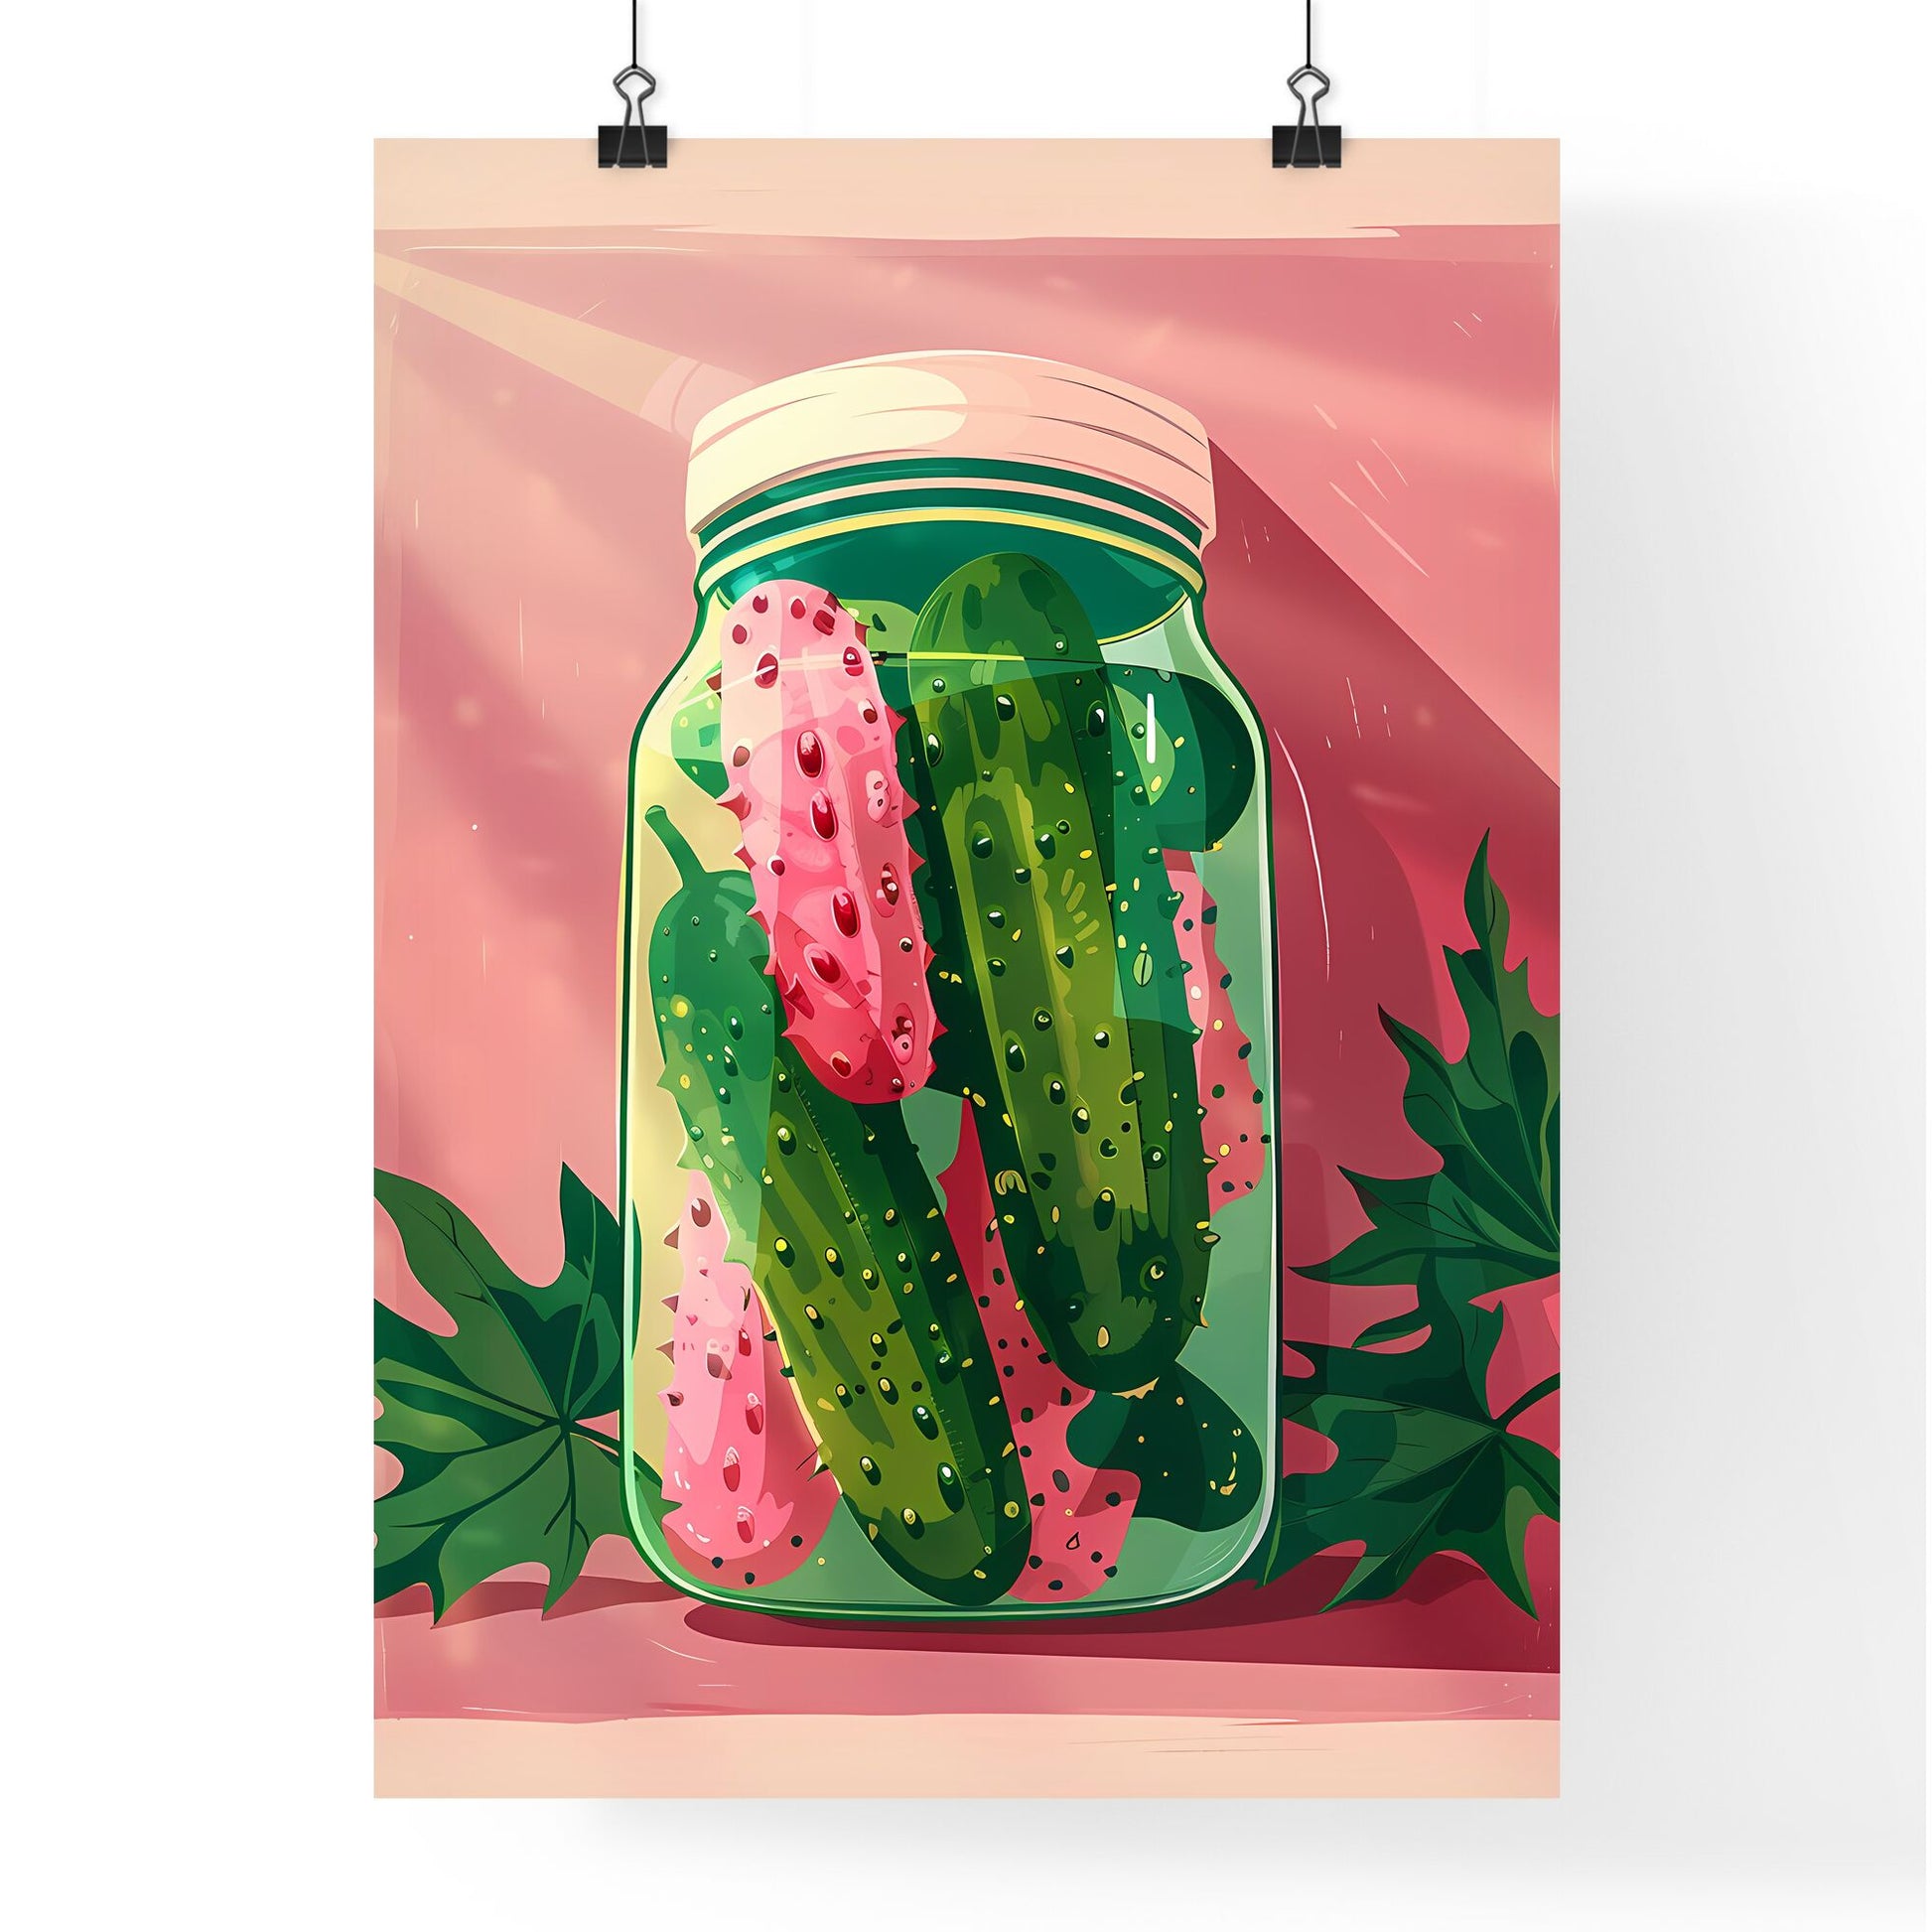 Vibrant Art Deco Style Digital Painting of a Jar of Pickles with Green and Red Pickles Default Title